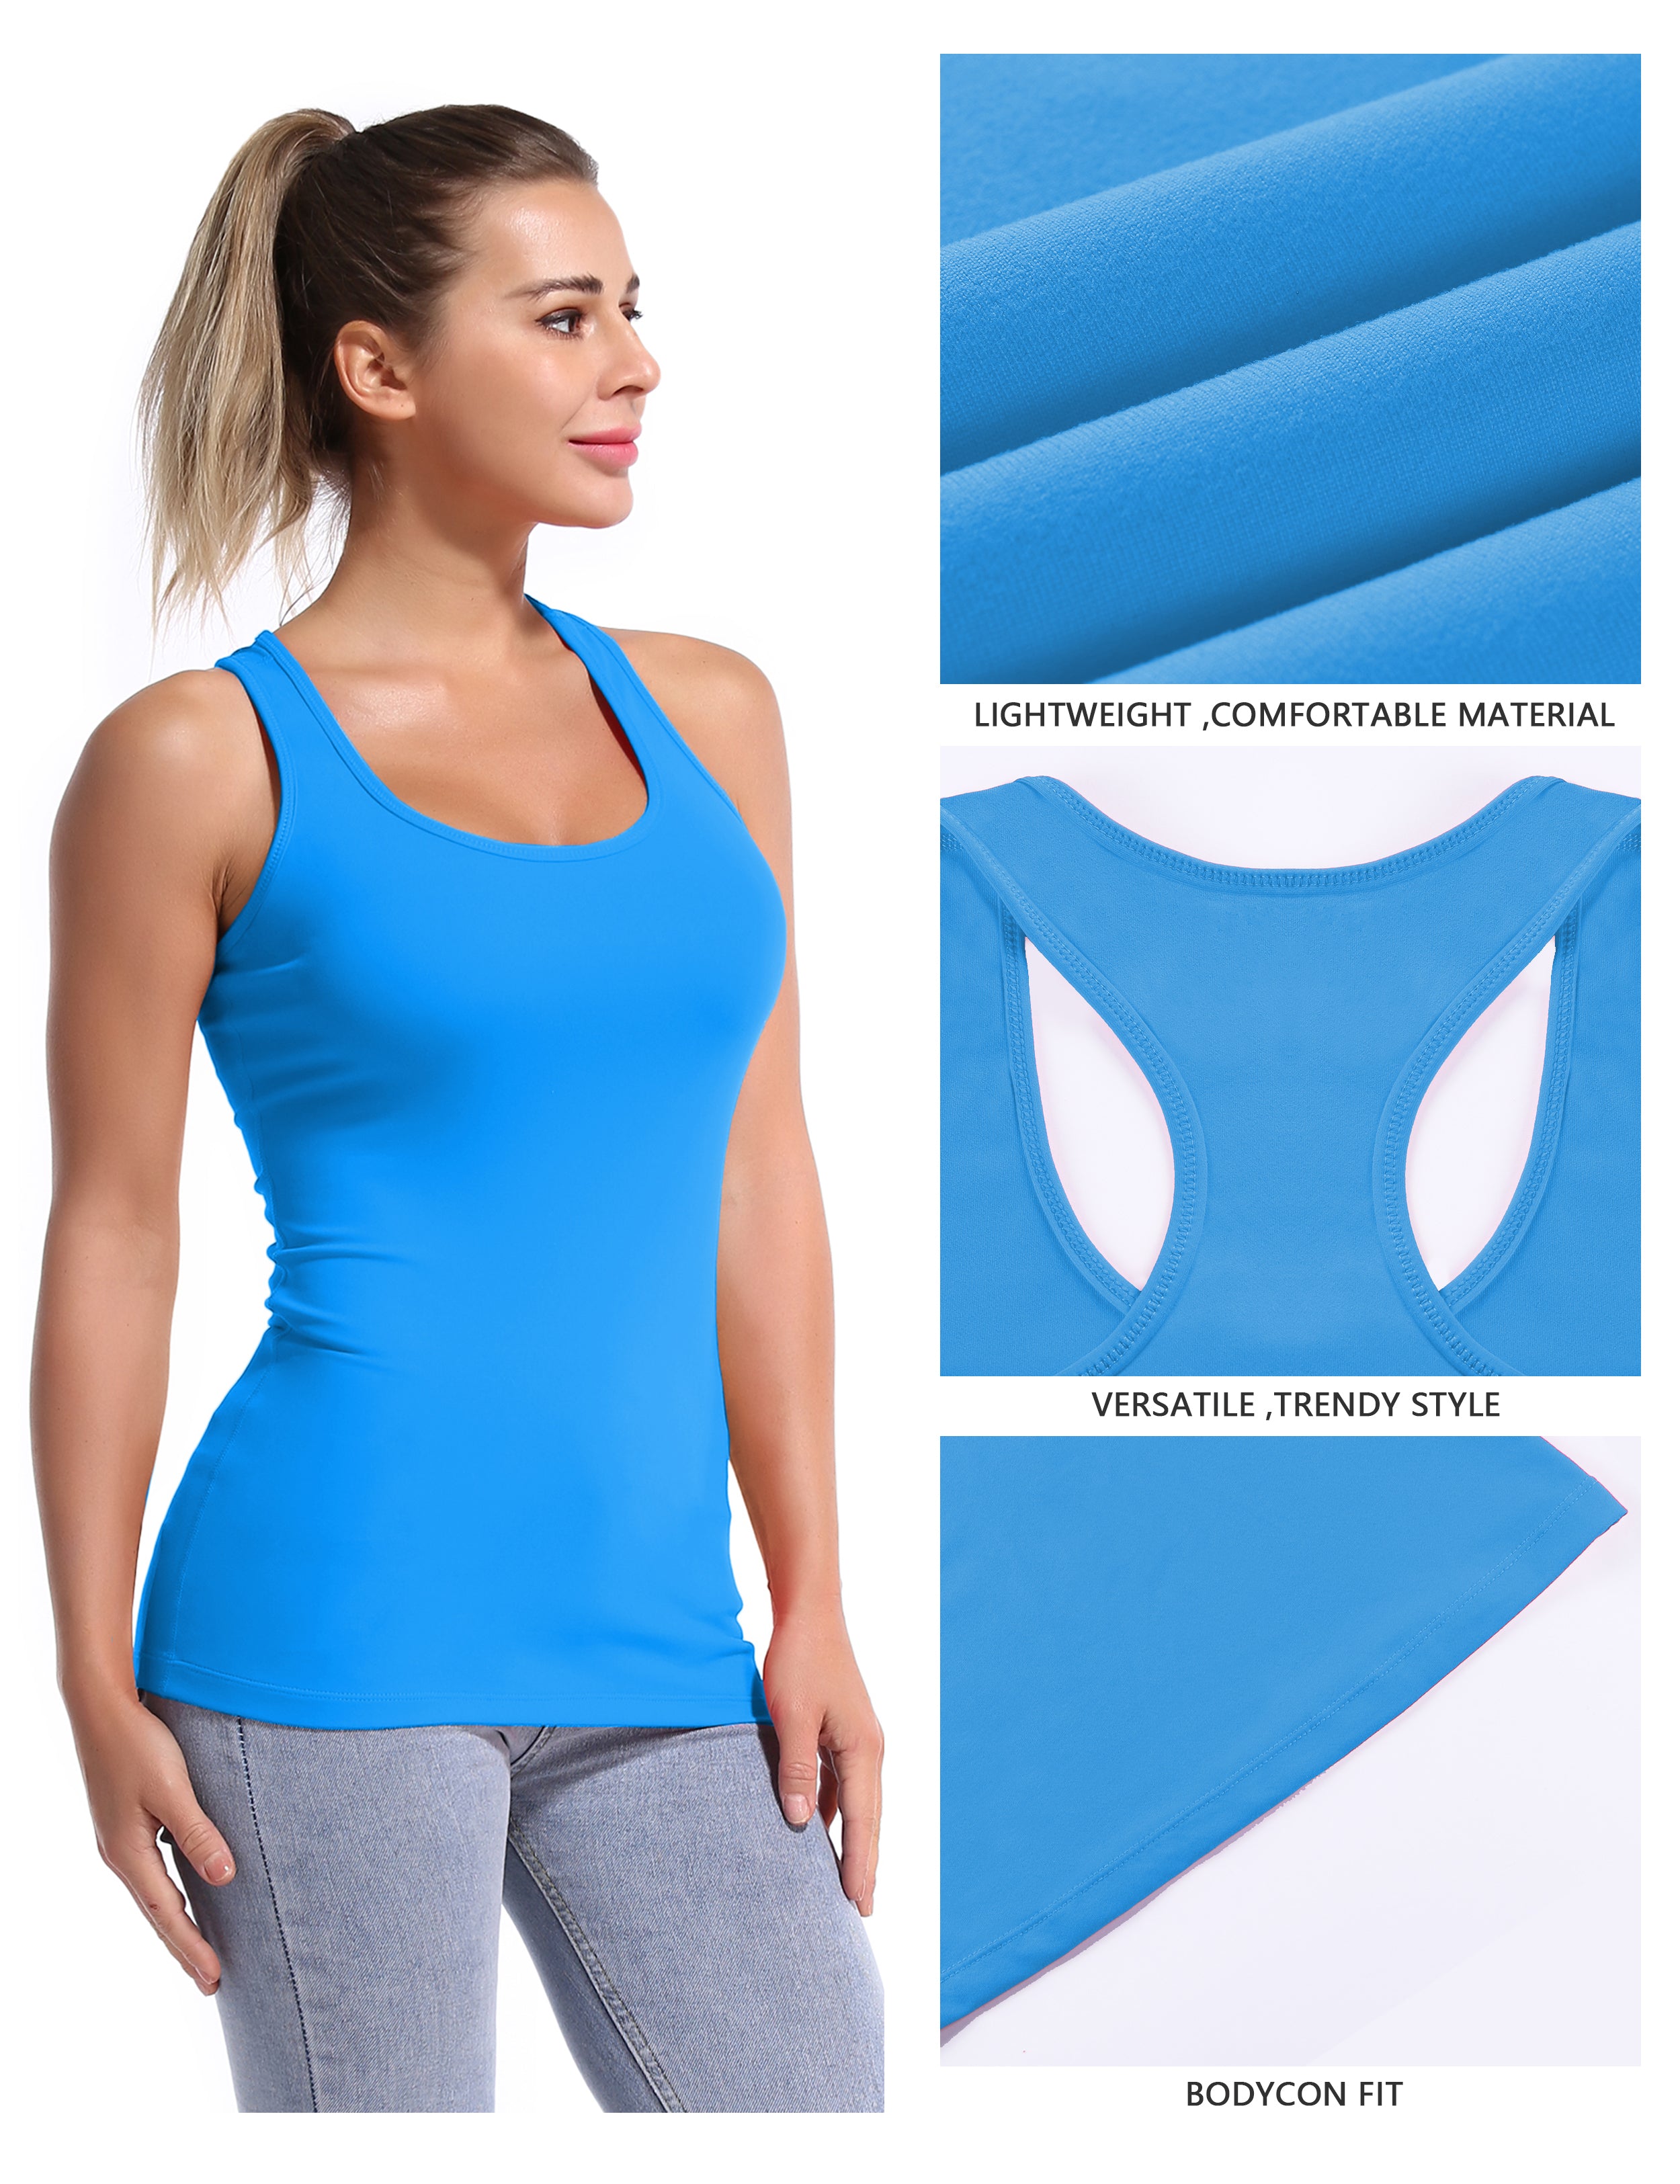 Racerback Athletic Tank Tops deepskyblue 92%Nylon/8%Spandex(Cotton Soft) Designed for Golf Tight Fit So buttery soft, it feels weightless Sweat-wicking Four-way stretch Breathable Contours your body Sits below the waistband for moderate, everyday coverage